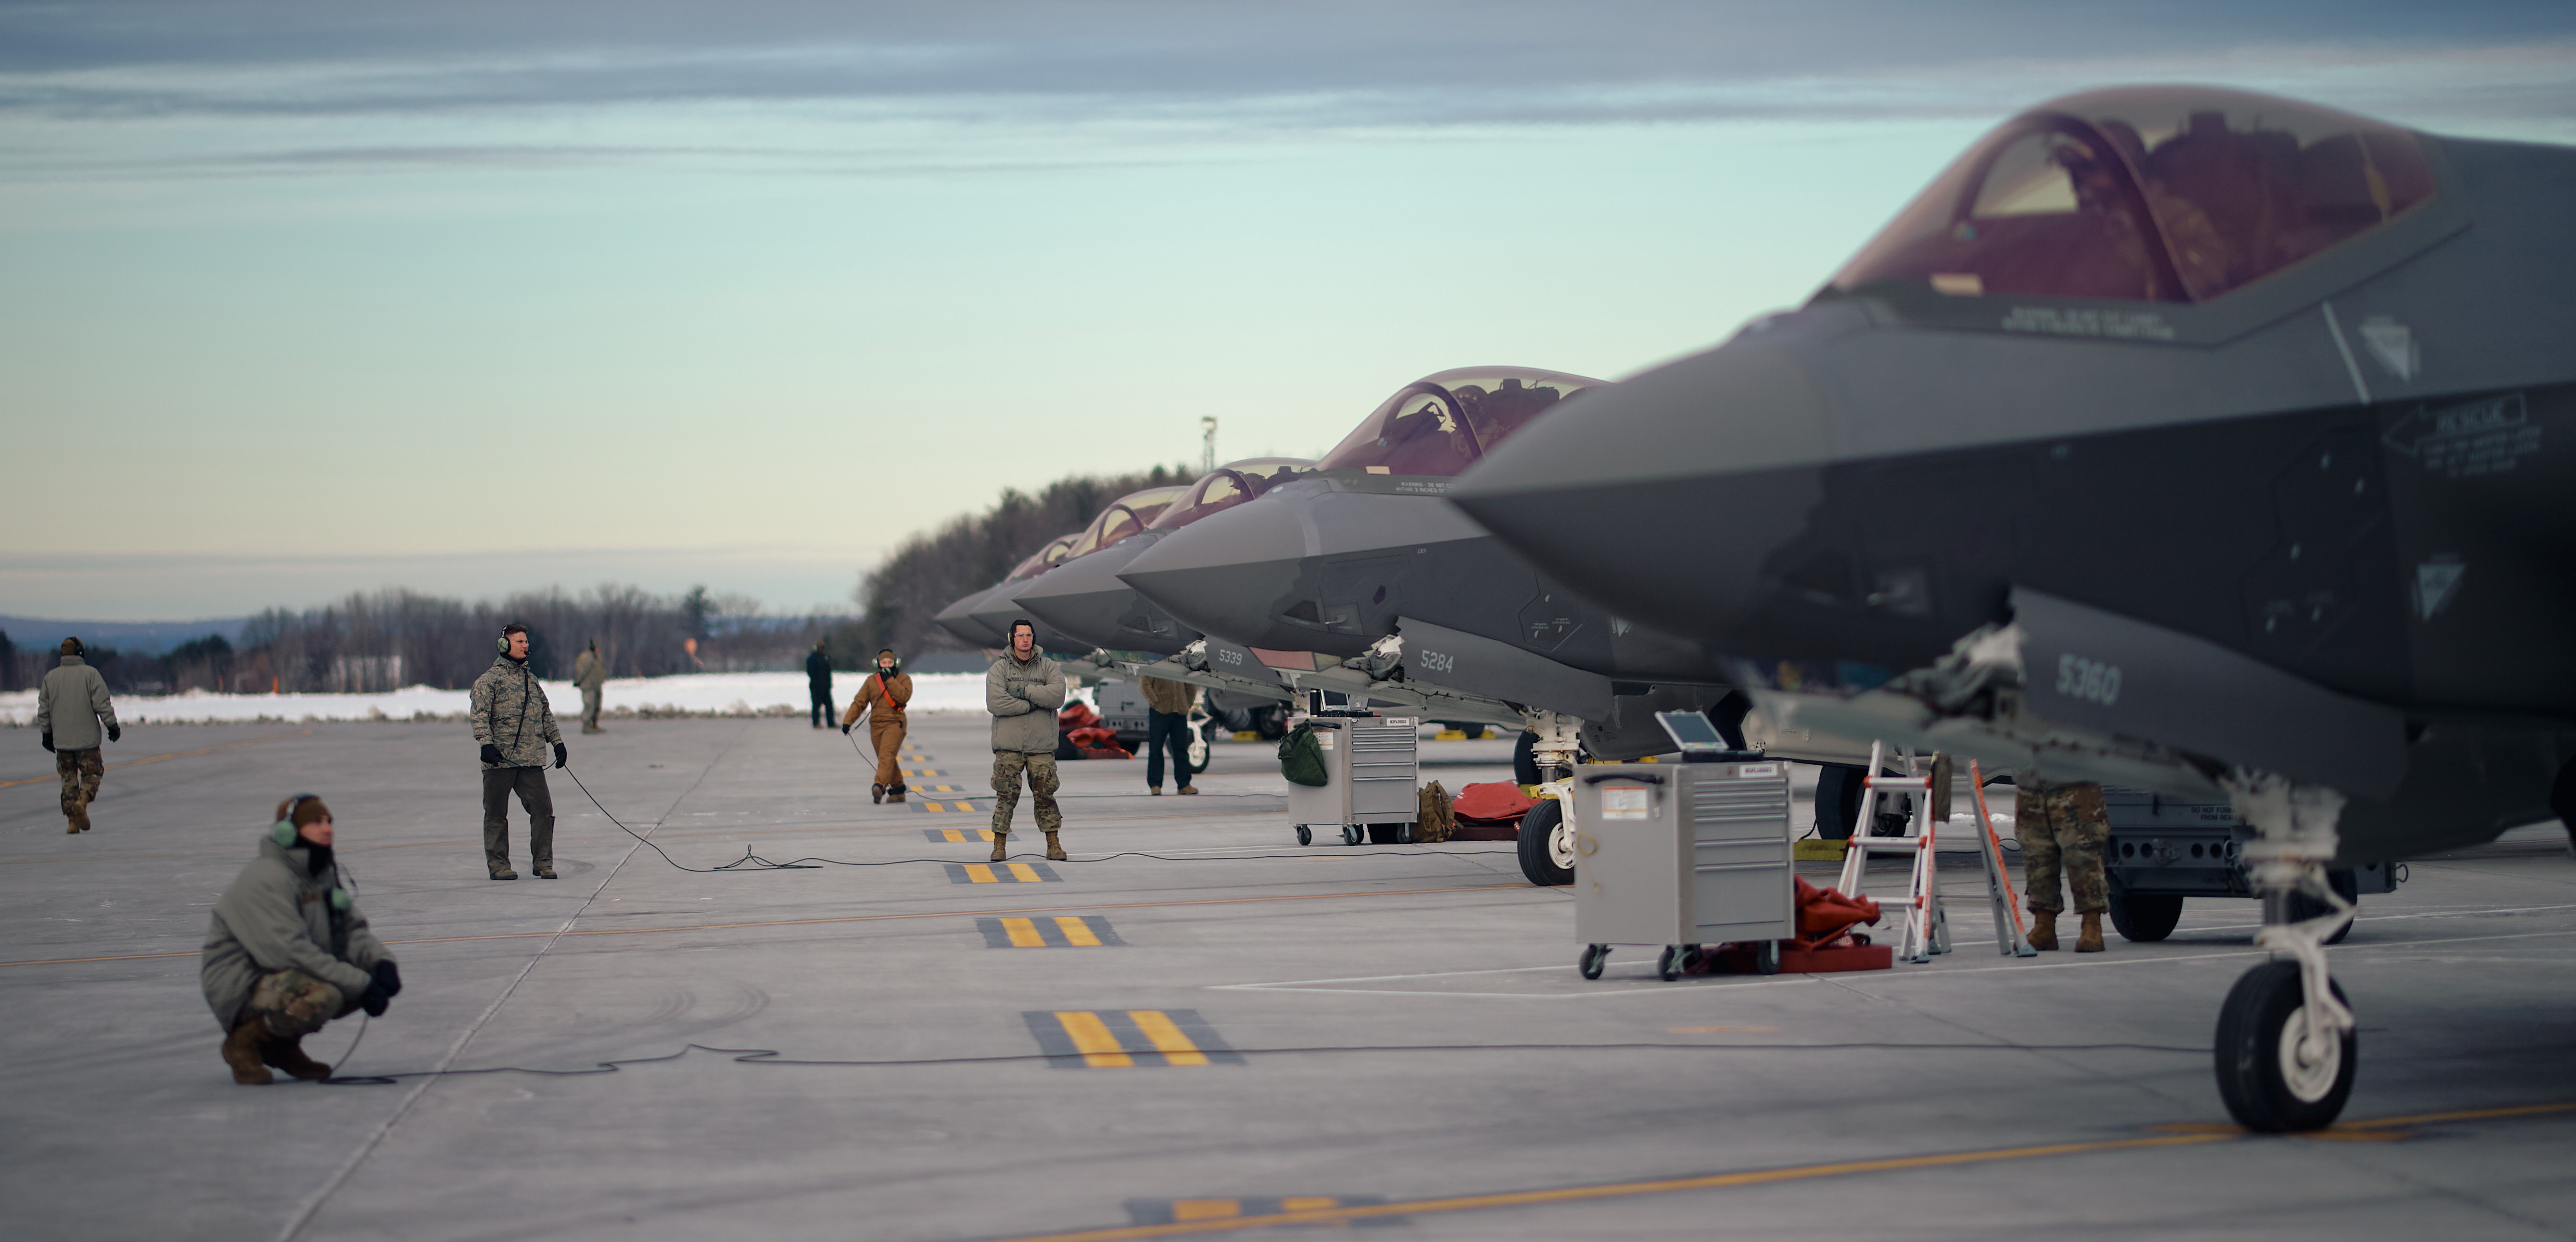 Pilots, crew chiefs and maintainers assigned to the Vermont Air National Guard's 158th Fighter Wing launch F-35A Lightning II Joint Strike Fighters from South Burlington Air National Guard Base, Vermont, Jan. 9, 2021. The Jan. 9 drill was conducted as a routine training mission, with the aircraft flying various simulated missions over military operating areas. (U.S. Air National Guard photo by Tech. Sgt. Ryan Campbell)